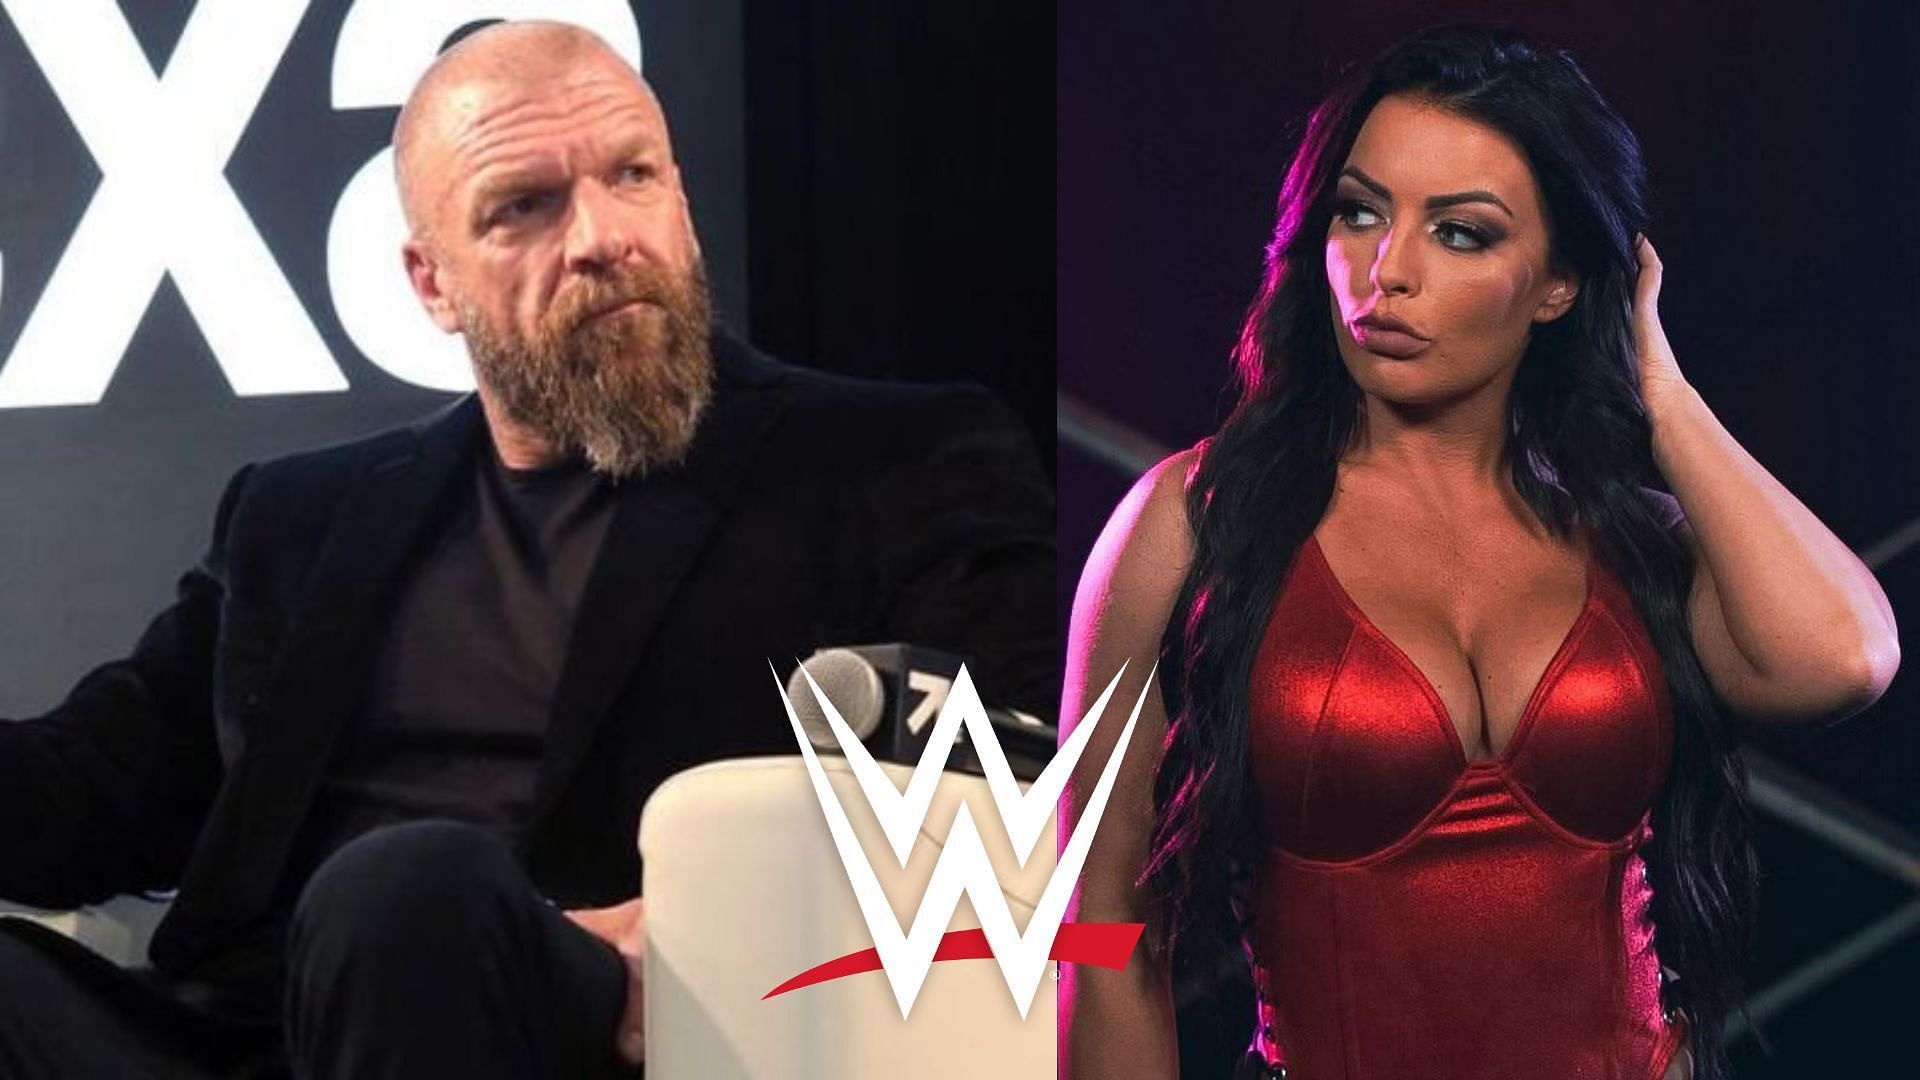 Triple H bring Mandy Rose back” - Fans go berserk after ex-WWE star gets  spotted with former authority figure